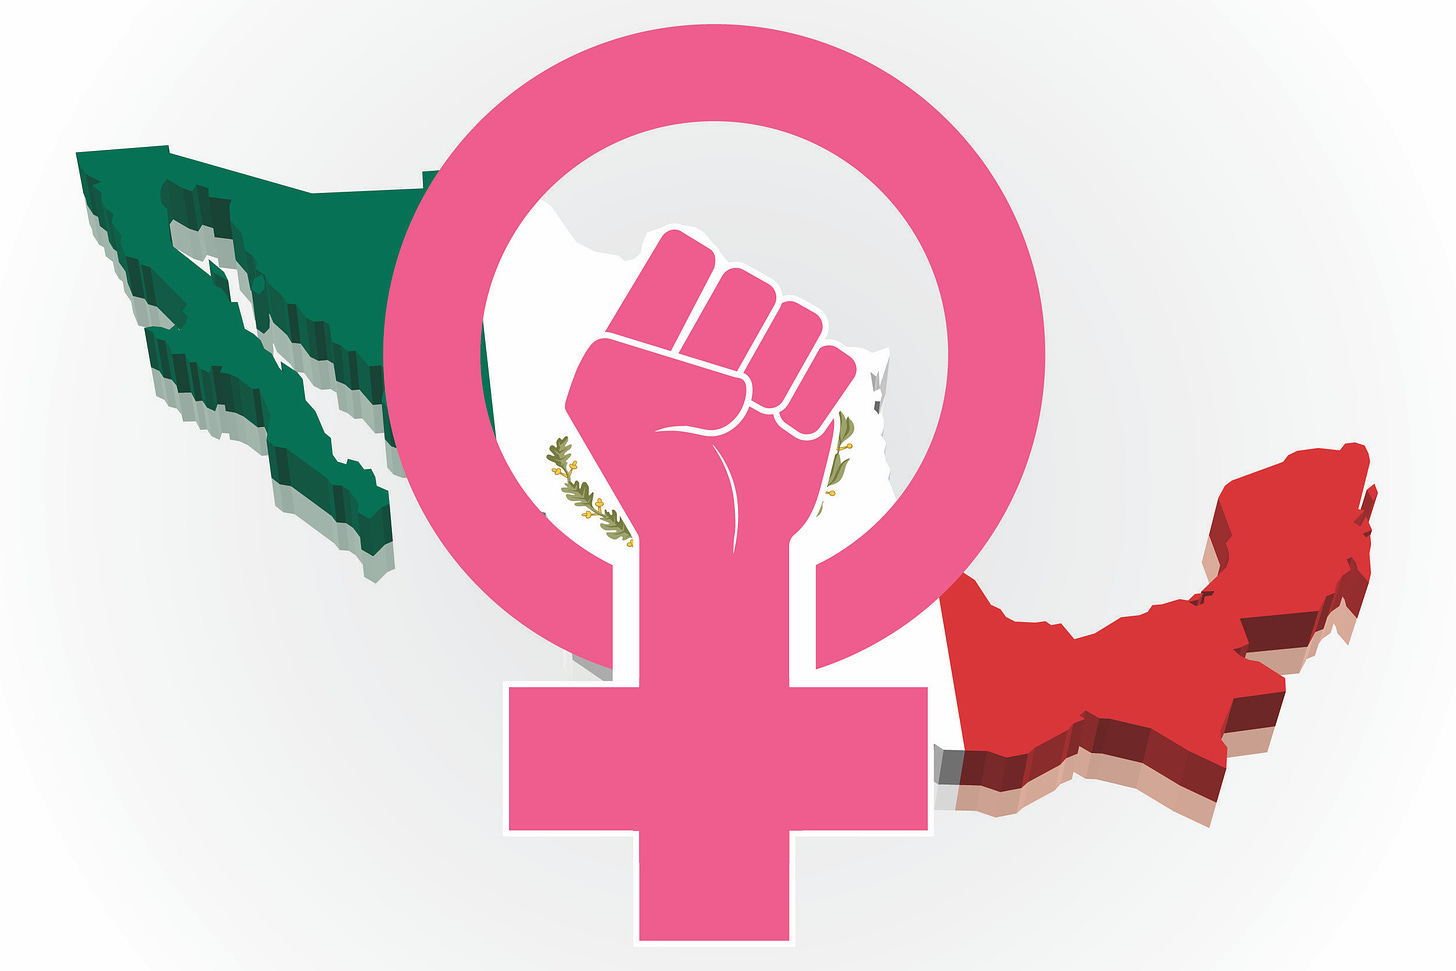 Woman power symbol superimposed over outline of Mexico